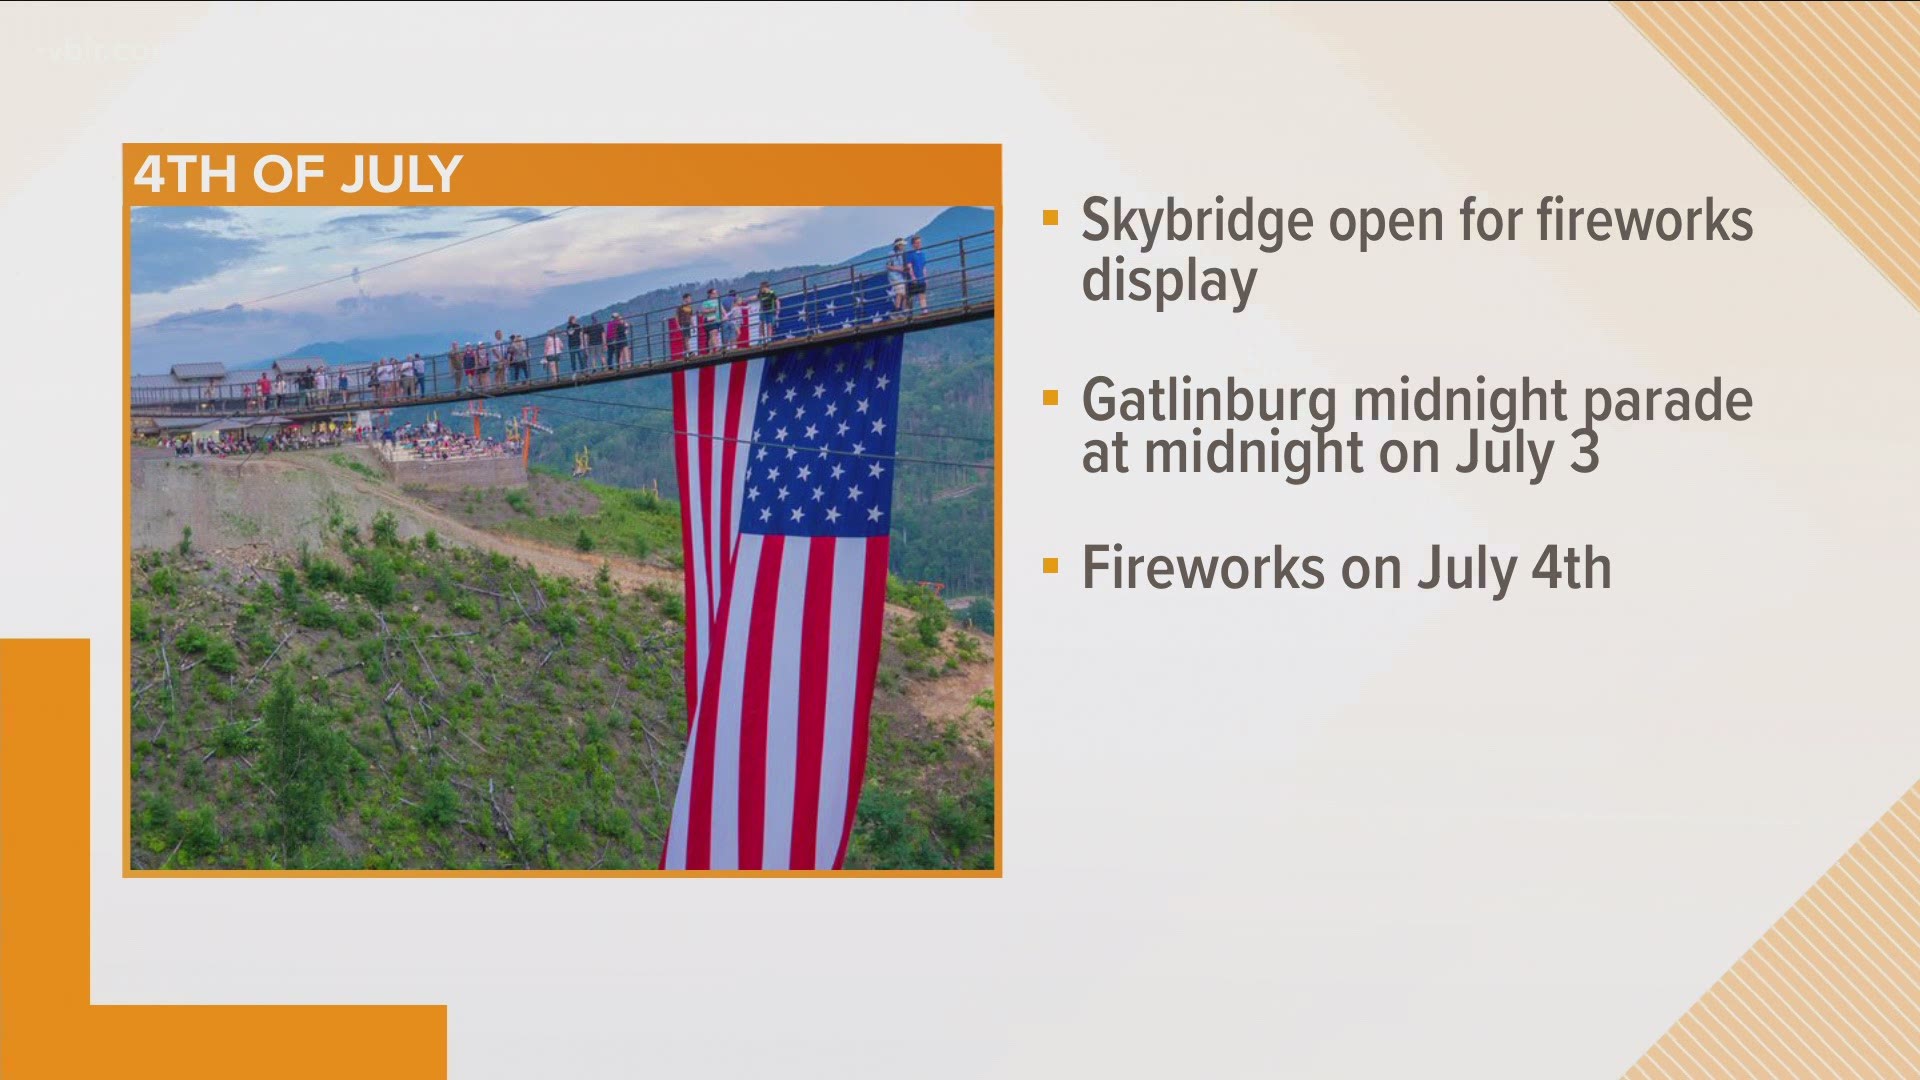 Several communities already have released their plans for the July 4 weekend.